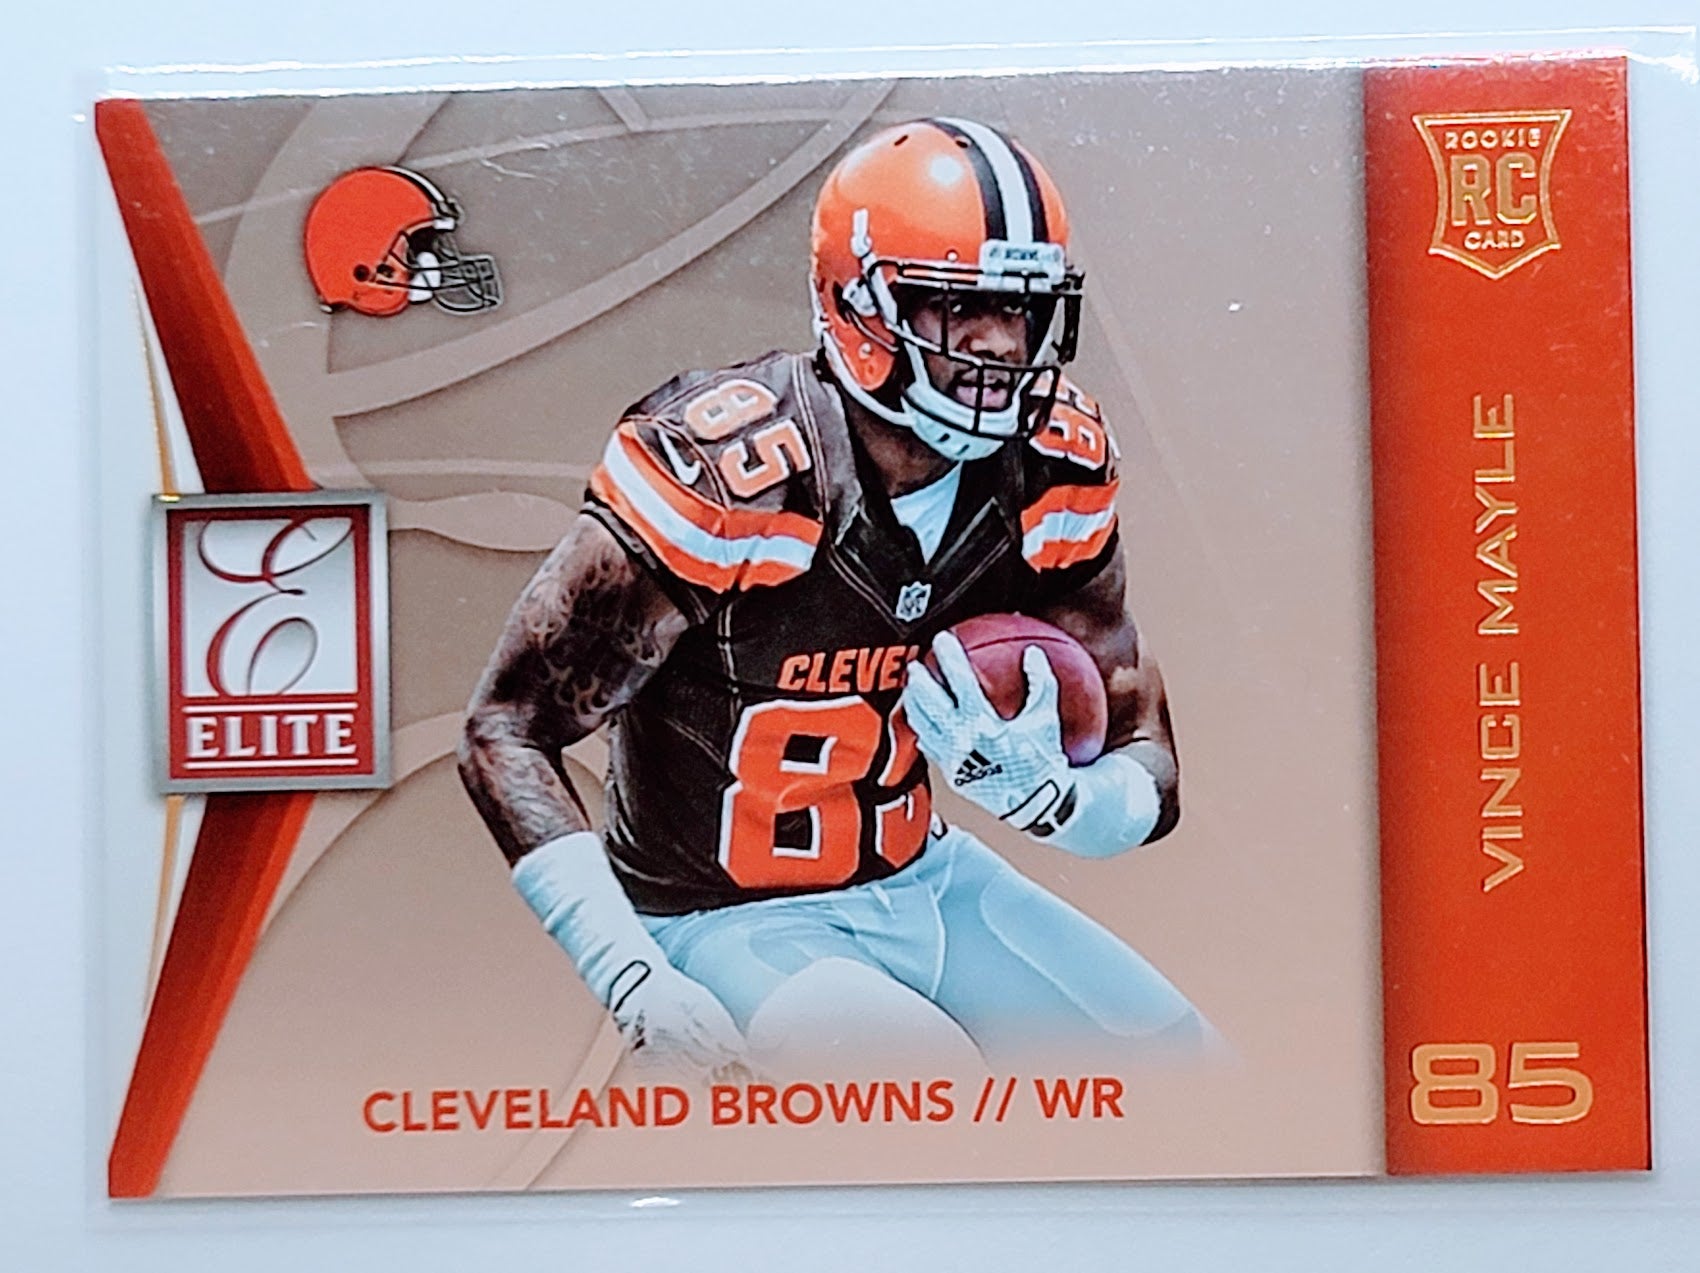 2015 Donruss Vince Mayle
Elite Cleveland Browns Football
  Card  TH1CB simple Xclusive Collectibles   